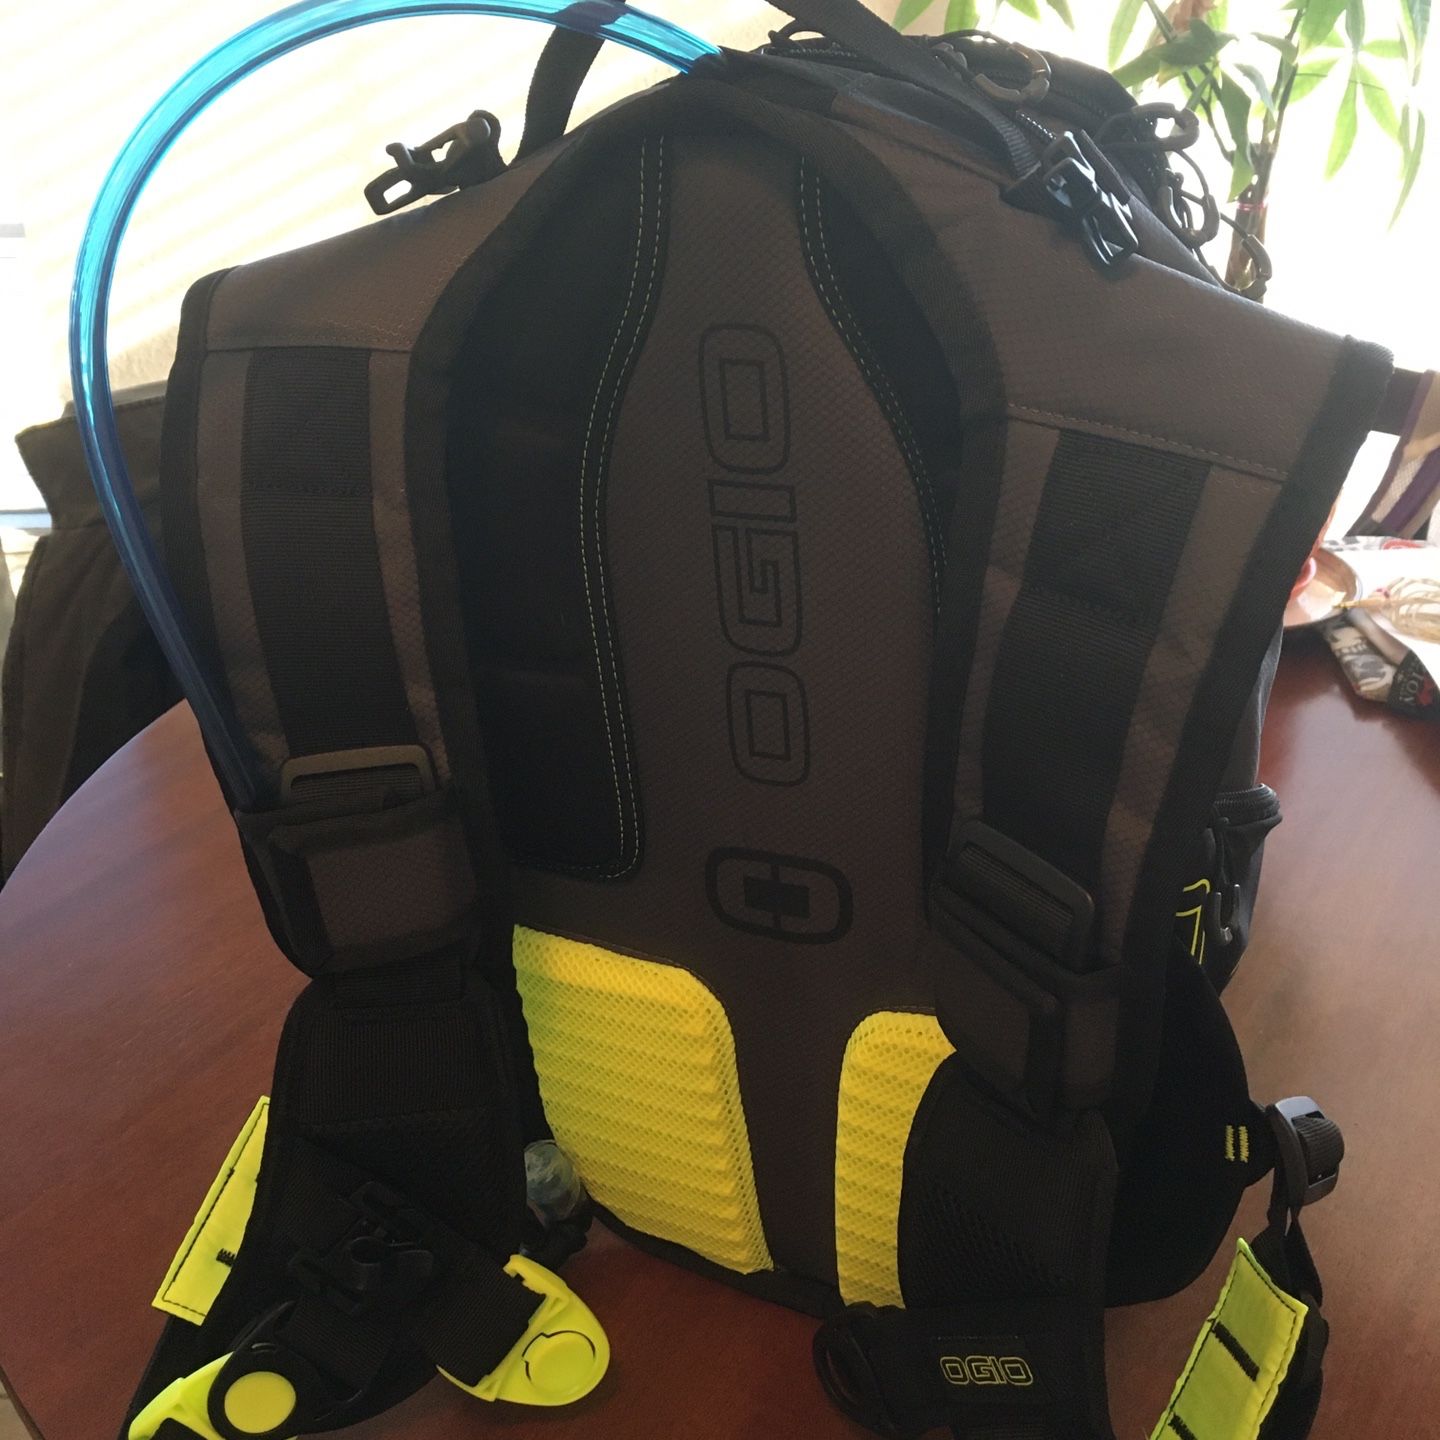 Ogio 3L Hydration Pack